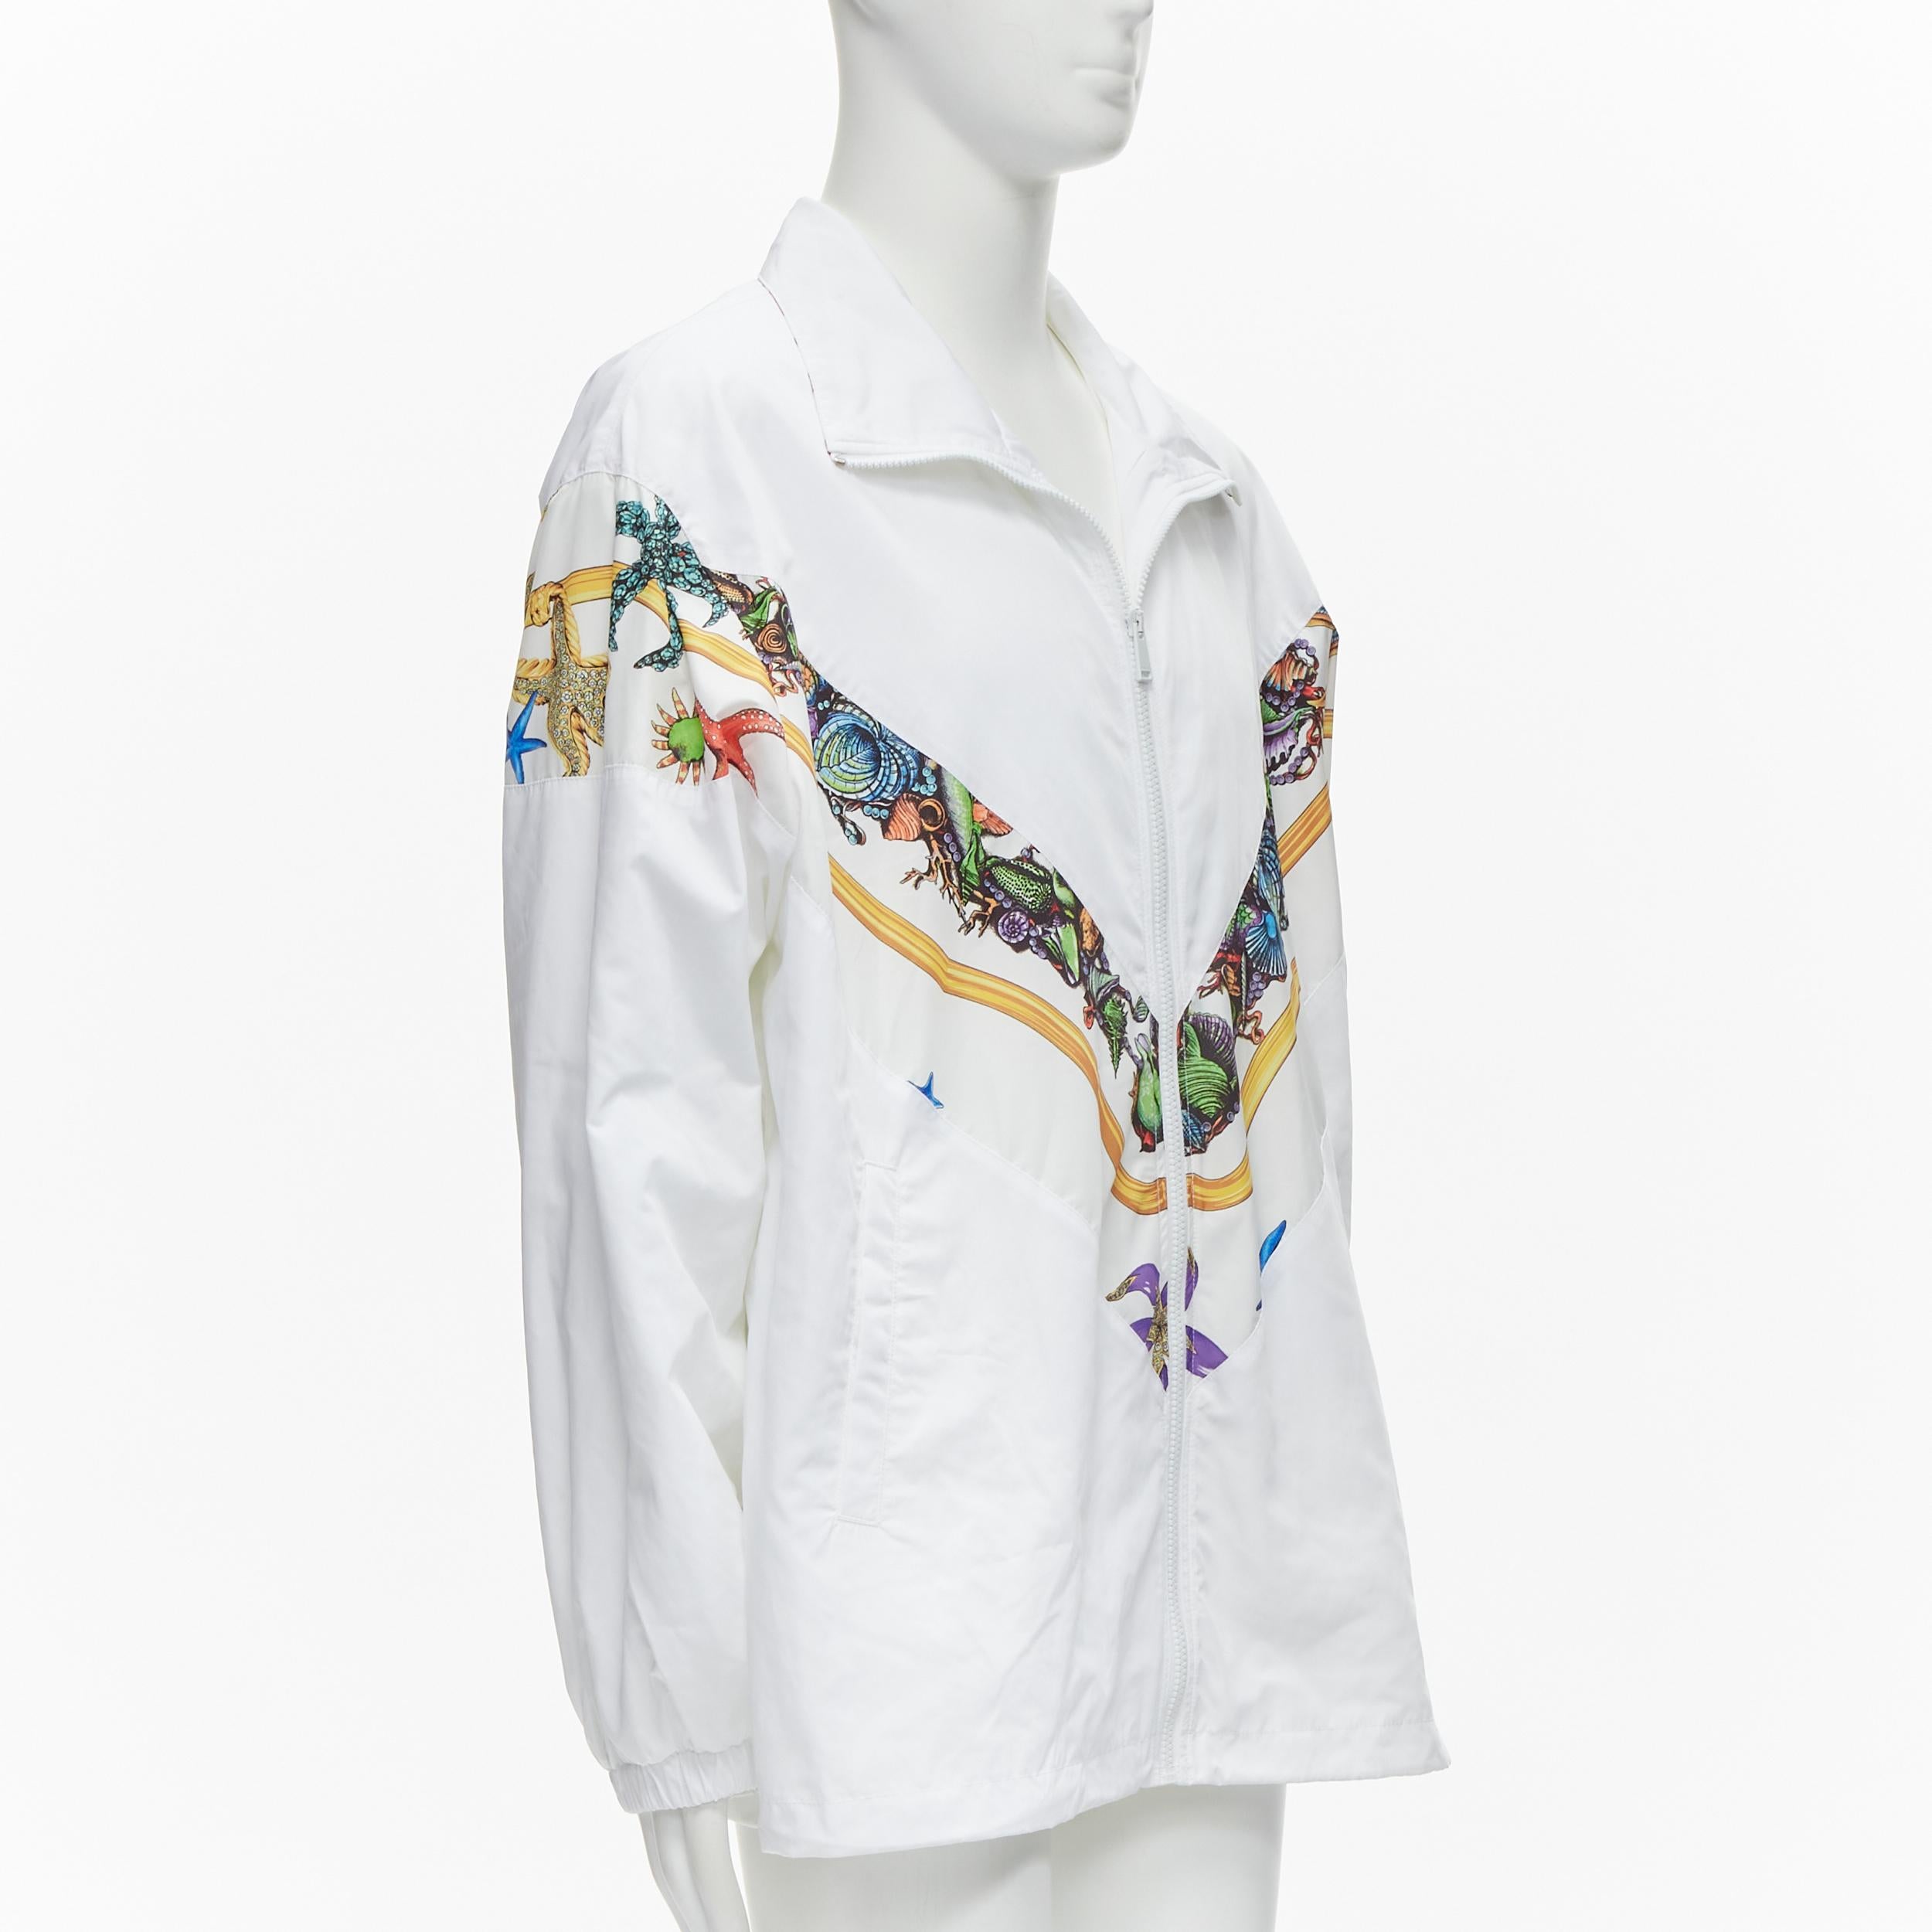 new VERSACE 2021 Tresor De La Mer Runway white starfish track jacket IT52 XL
Reference: TGAS/C01844
Brand: Versace
Designer: Donatella Versace
Model: A89028 1F00977 5W030
Collection: Runway
Material: Polyester
Color: White
Pattern: Abstract
Extra